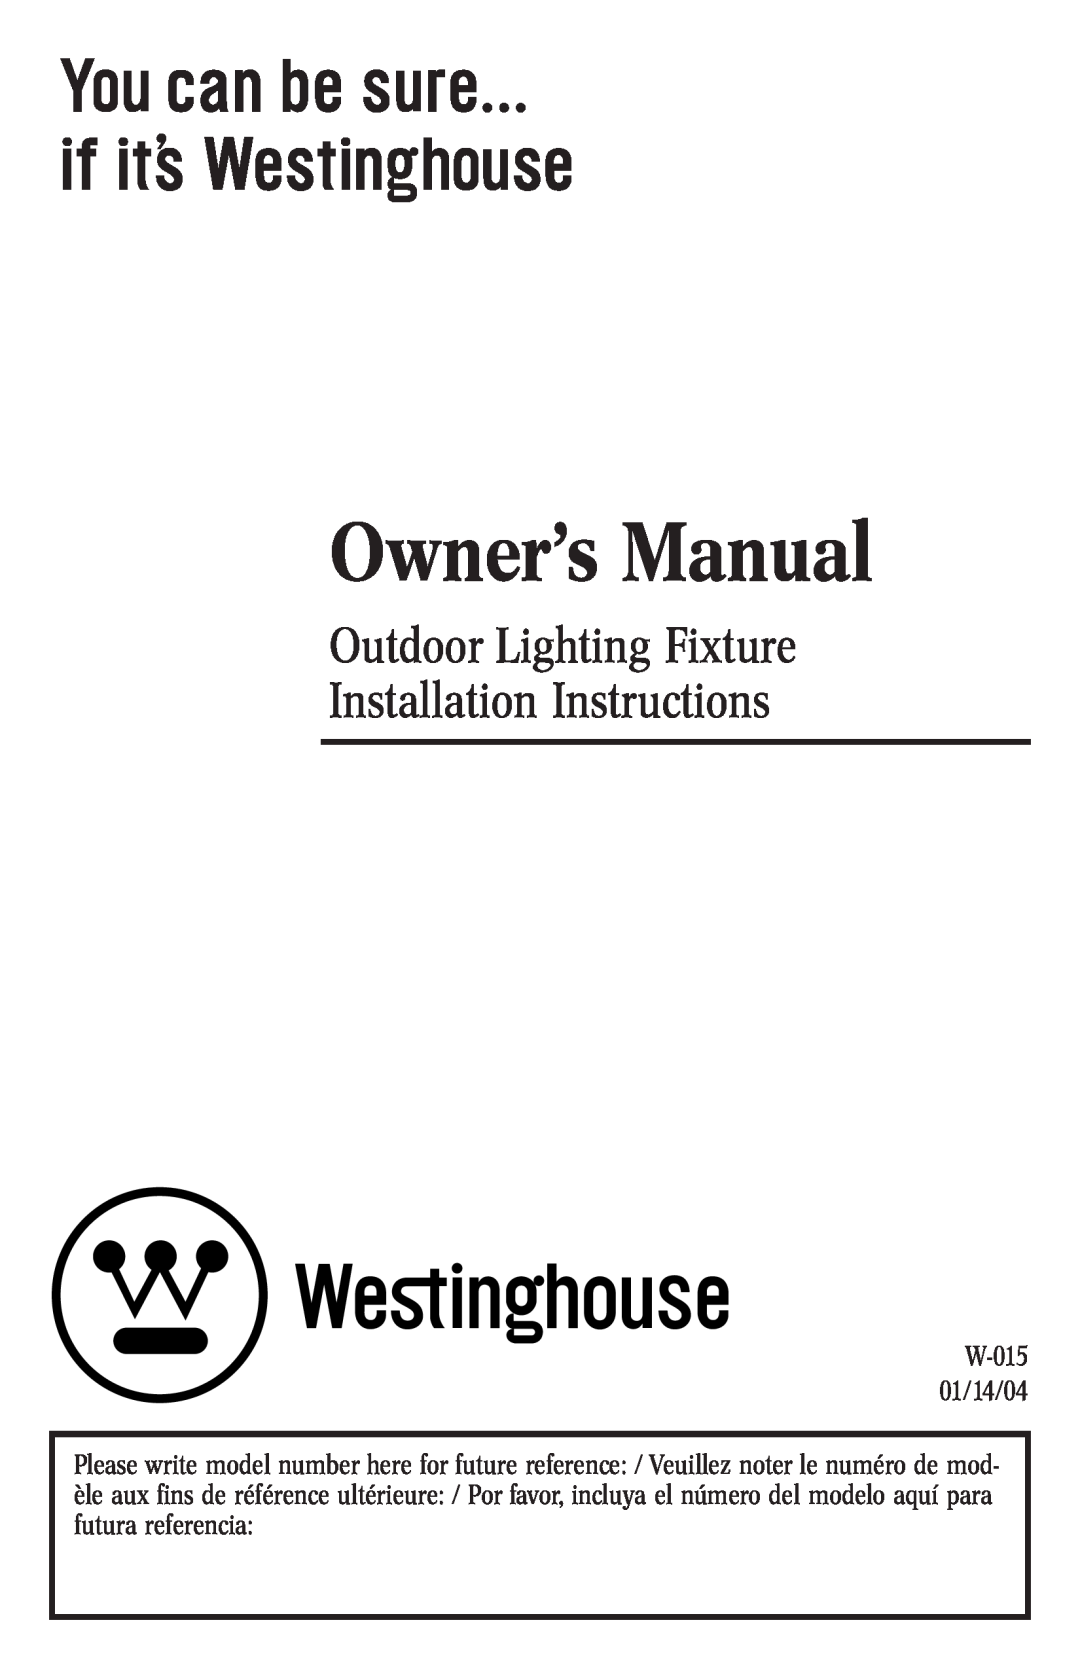 Westinghouse W-105 owner manual Outdoor Lighting Fixture, Installation Instructions 